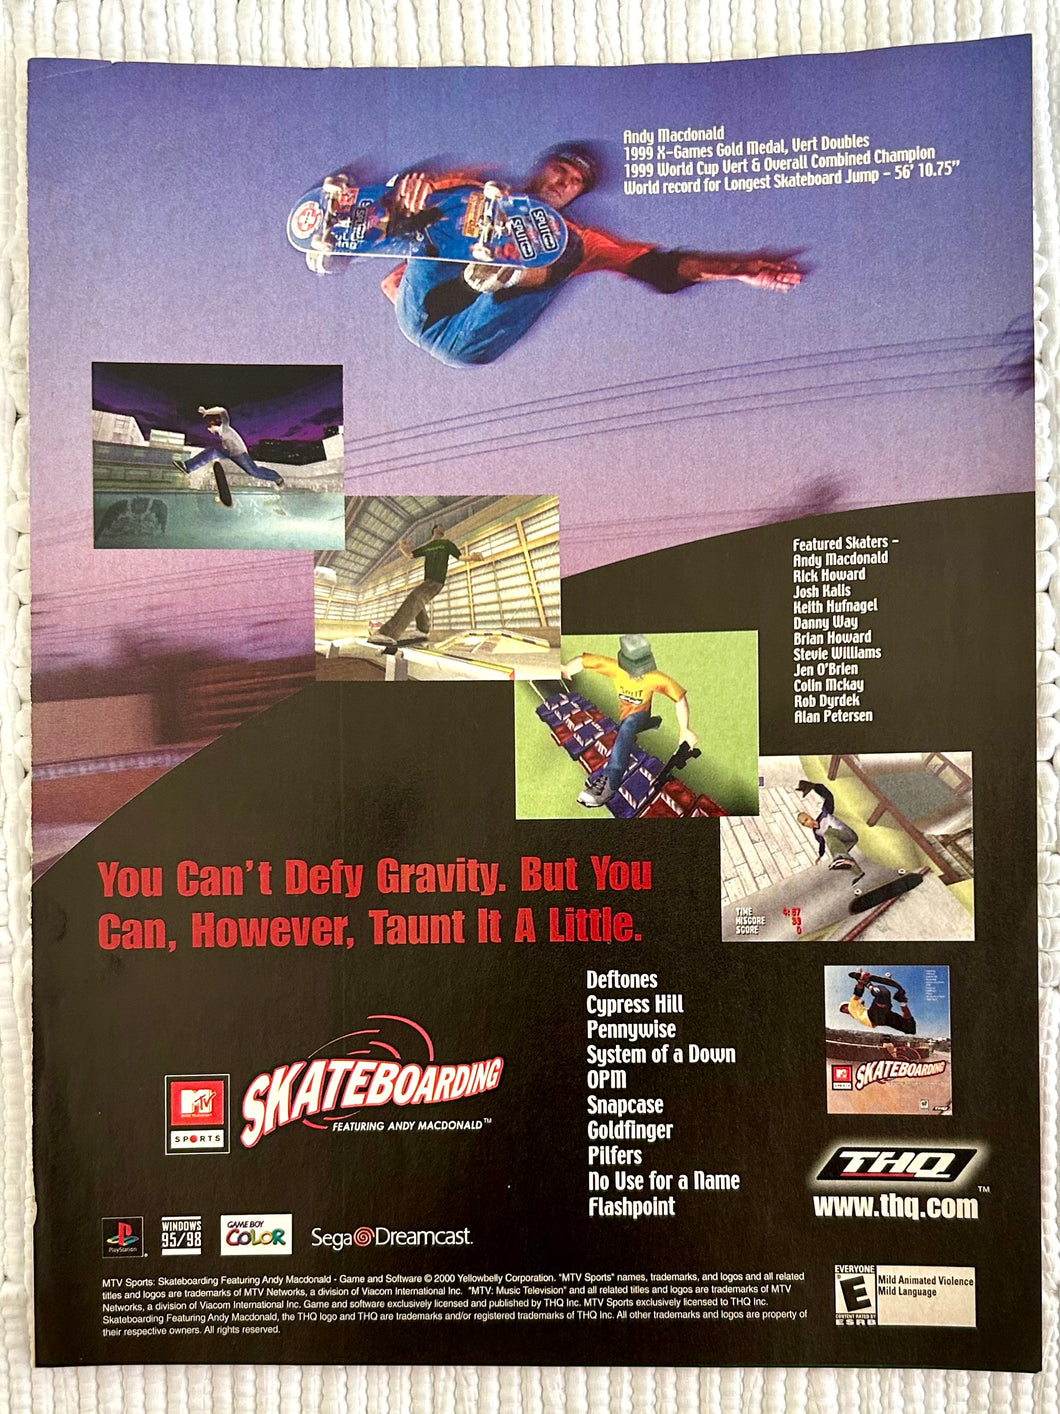 MTV Sports: Skateboarding Featuring Andy Macdonald - Dreamcast PlayStation GBC - Original Vintage Advertisement - Print Ads - Laminated A4 Poster